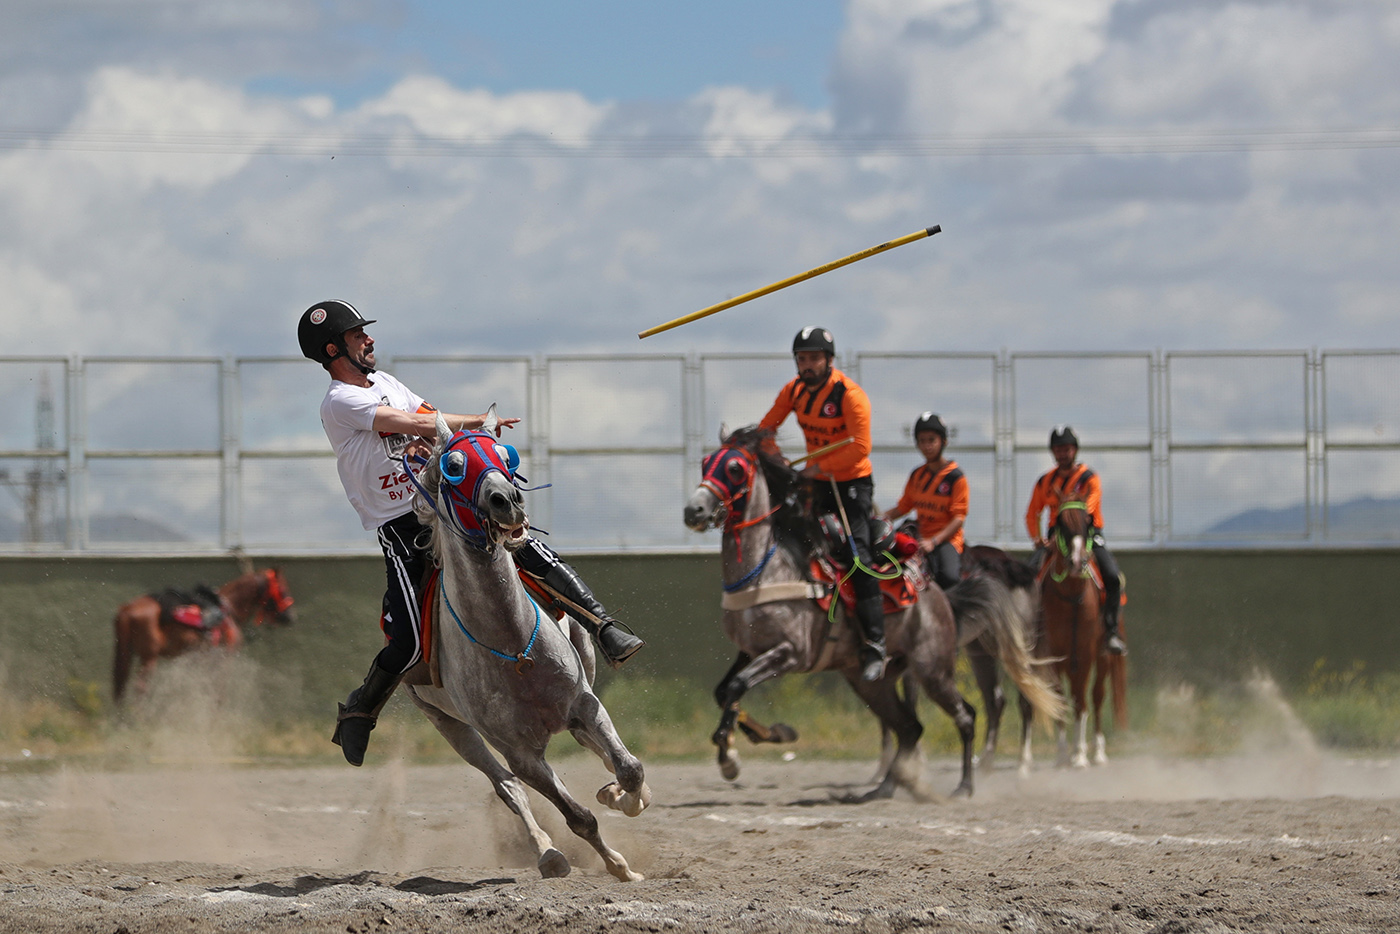 Players throws javalen during the Turkish Javelin Throw League game between Uzmanlar Sports Club and Ilica Sports Club in Erzurum, Turkey, 30 June 2019. Mounted javelin throwing, which is known as the war game of the Turks that has been played since their time in Cental Asia and mentioned as a traditional equestrian sport, has become a main tourist attraction in Erzurum, where the game is played throughout the year.